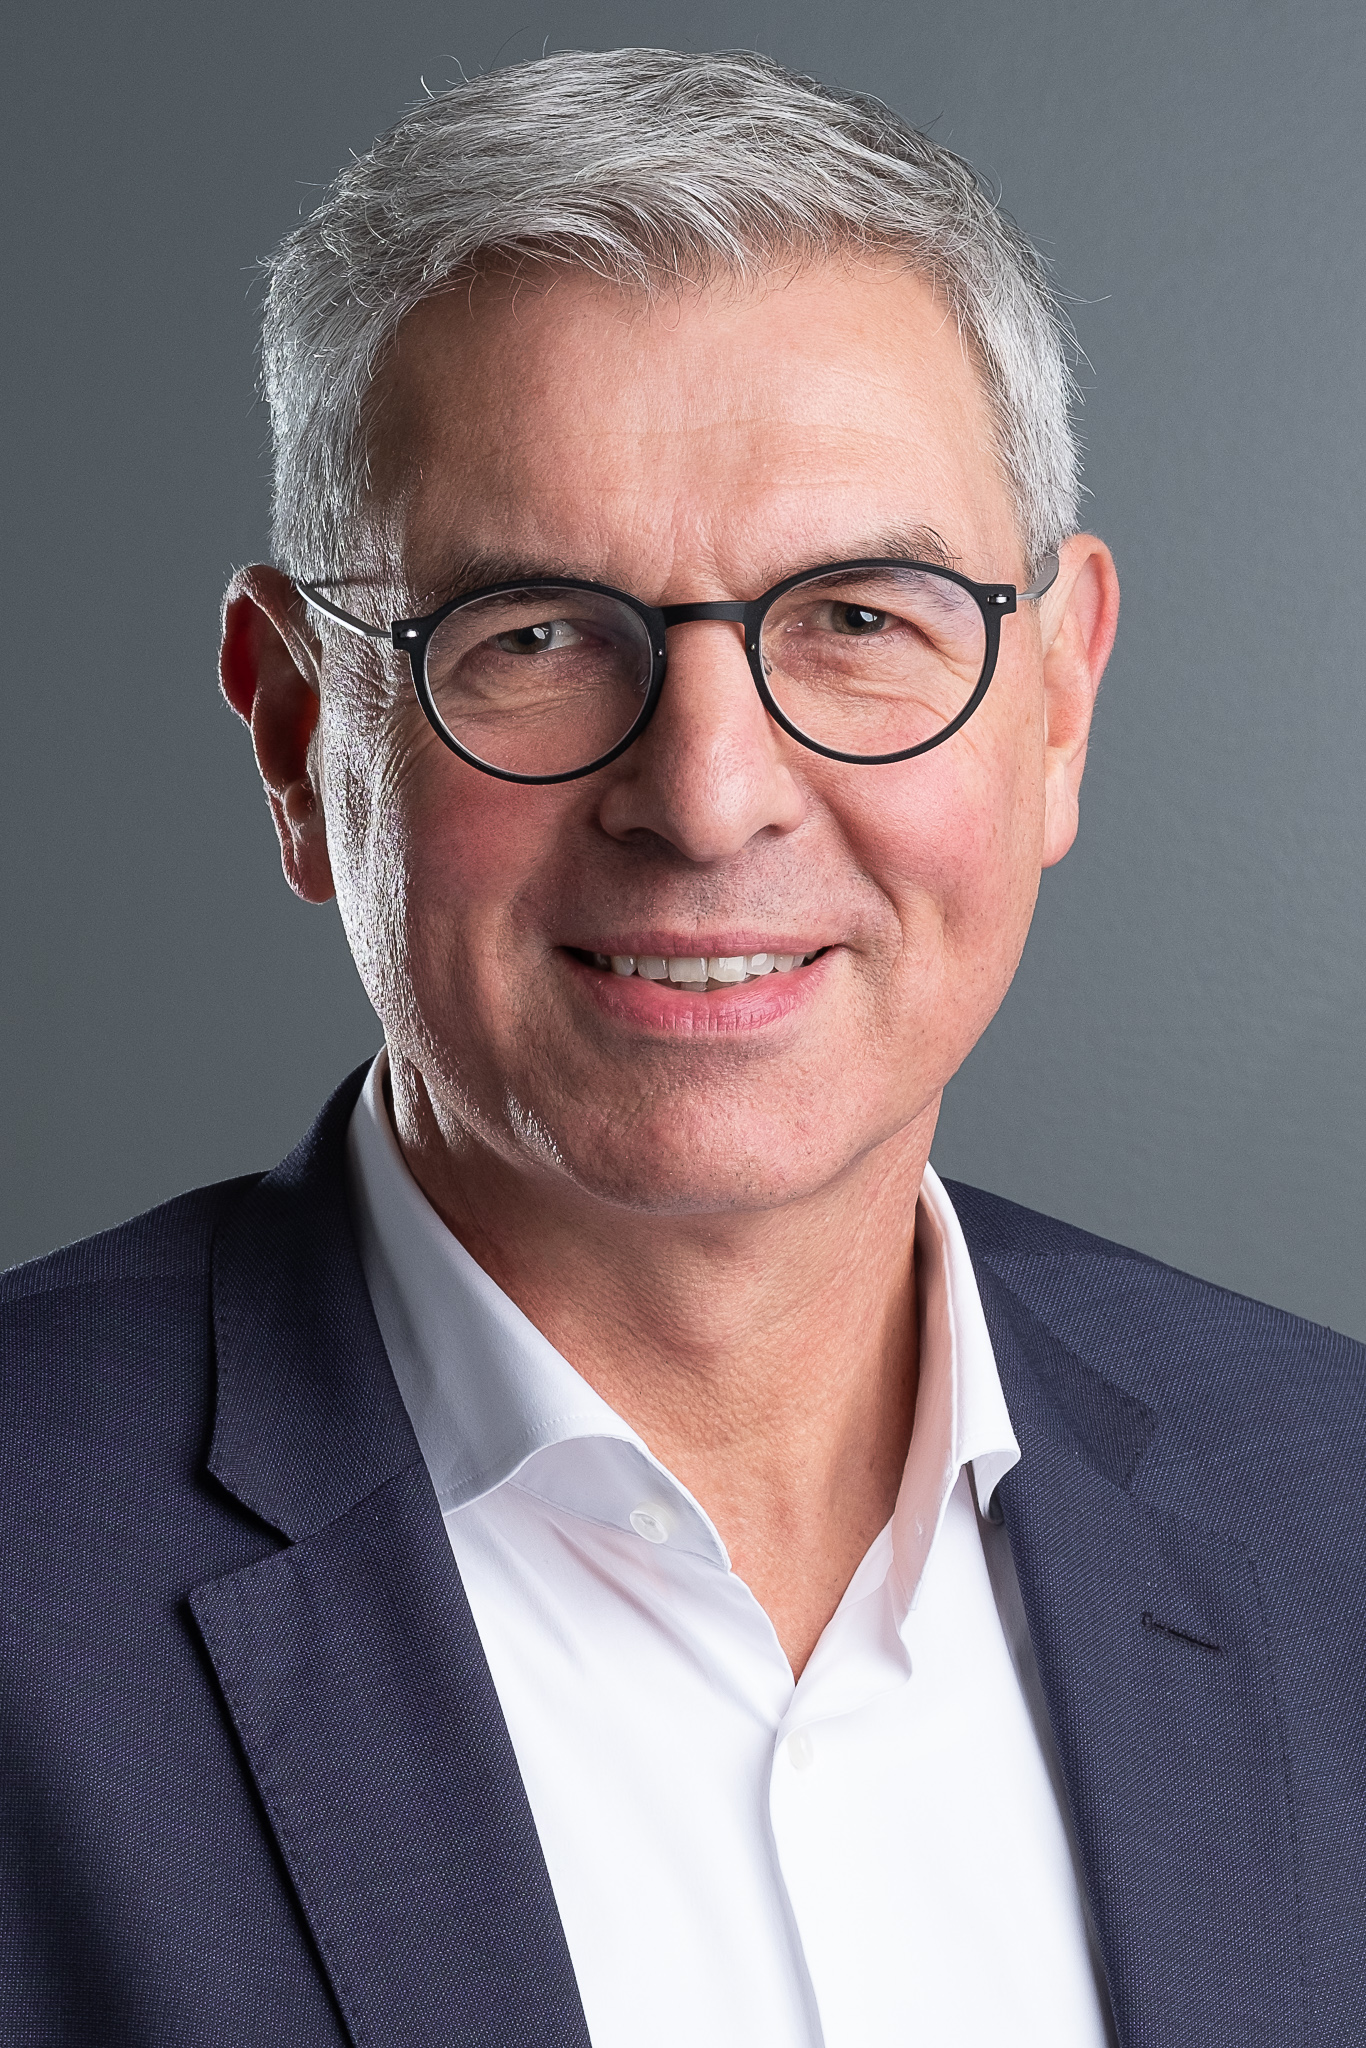 Cerence Board of Directors Promotes Dr. Stefan Ortmanns to Chief Executive Officer and Director